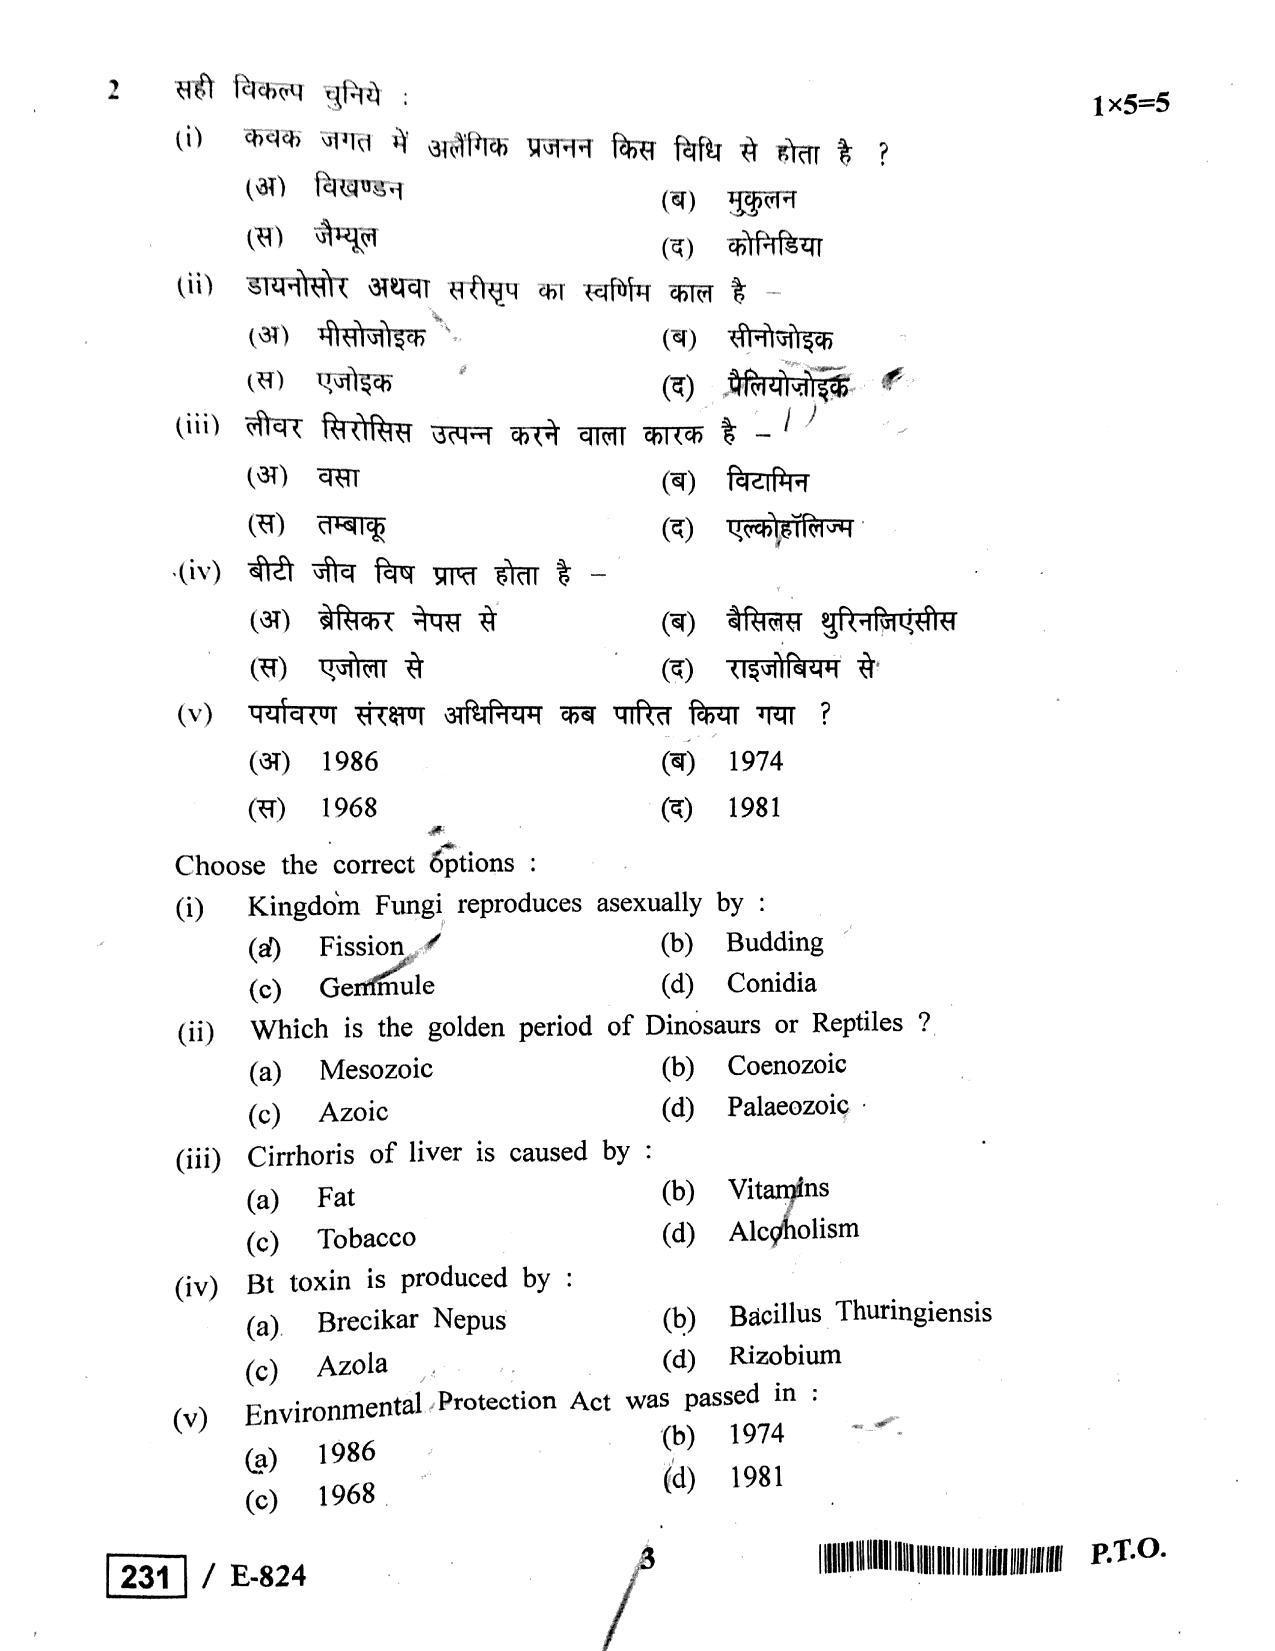 MP Board Class 12 Biology 2020 Question Paper - Page 3